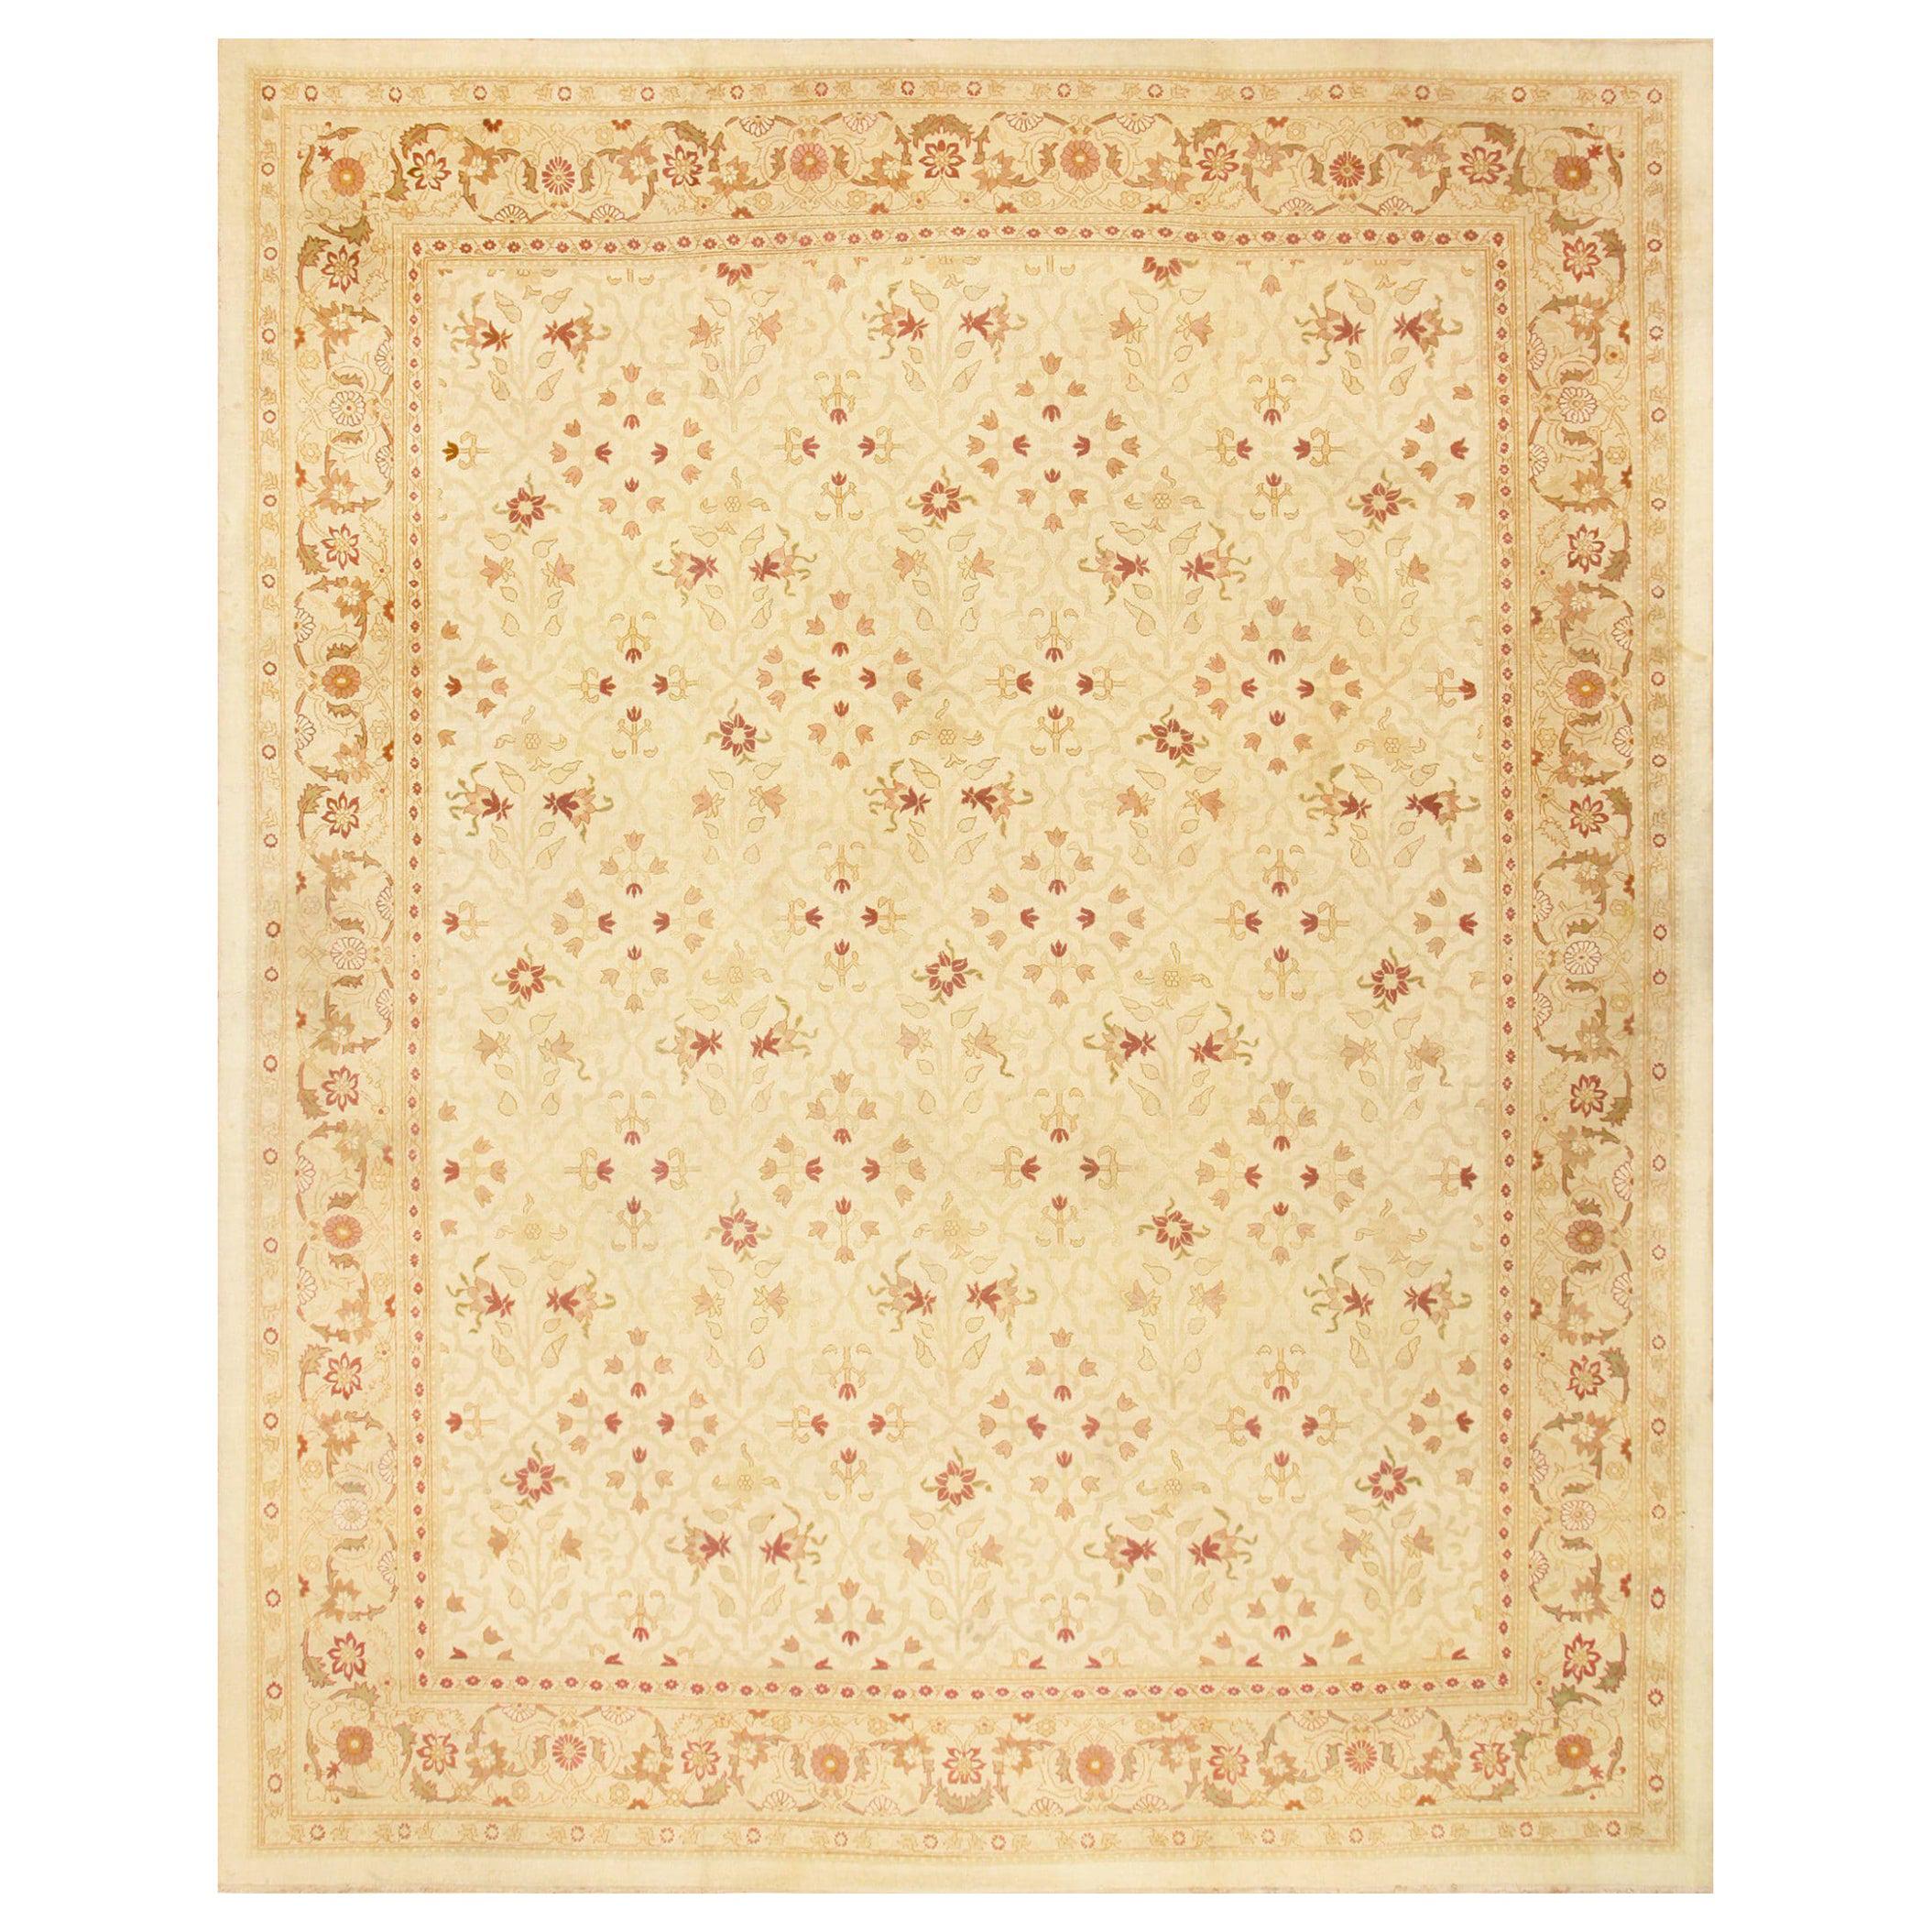 Indian Amritsar Rug. Size: 13 ft 7 in x 17 ft 